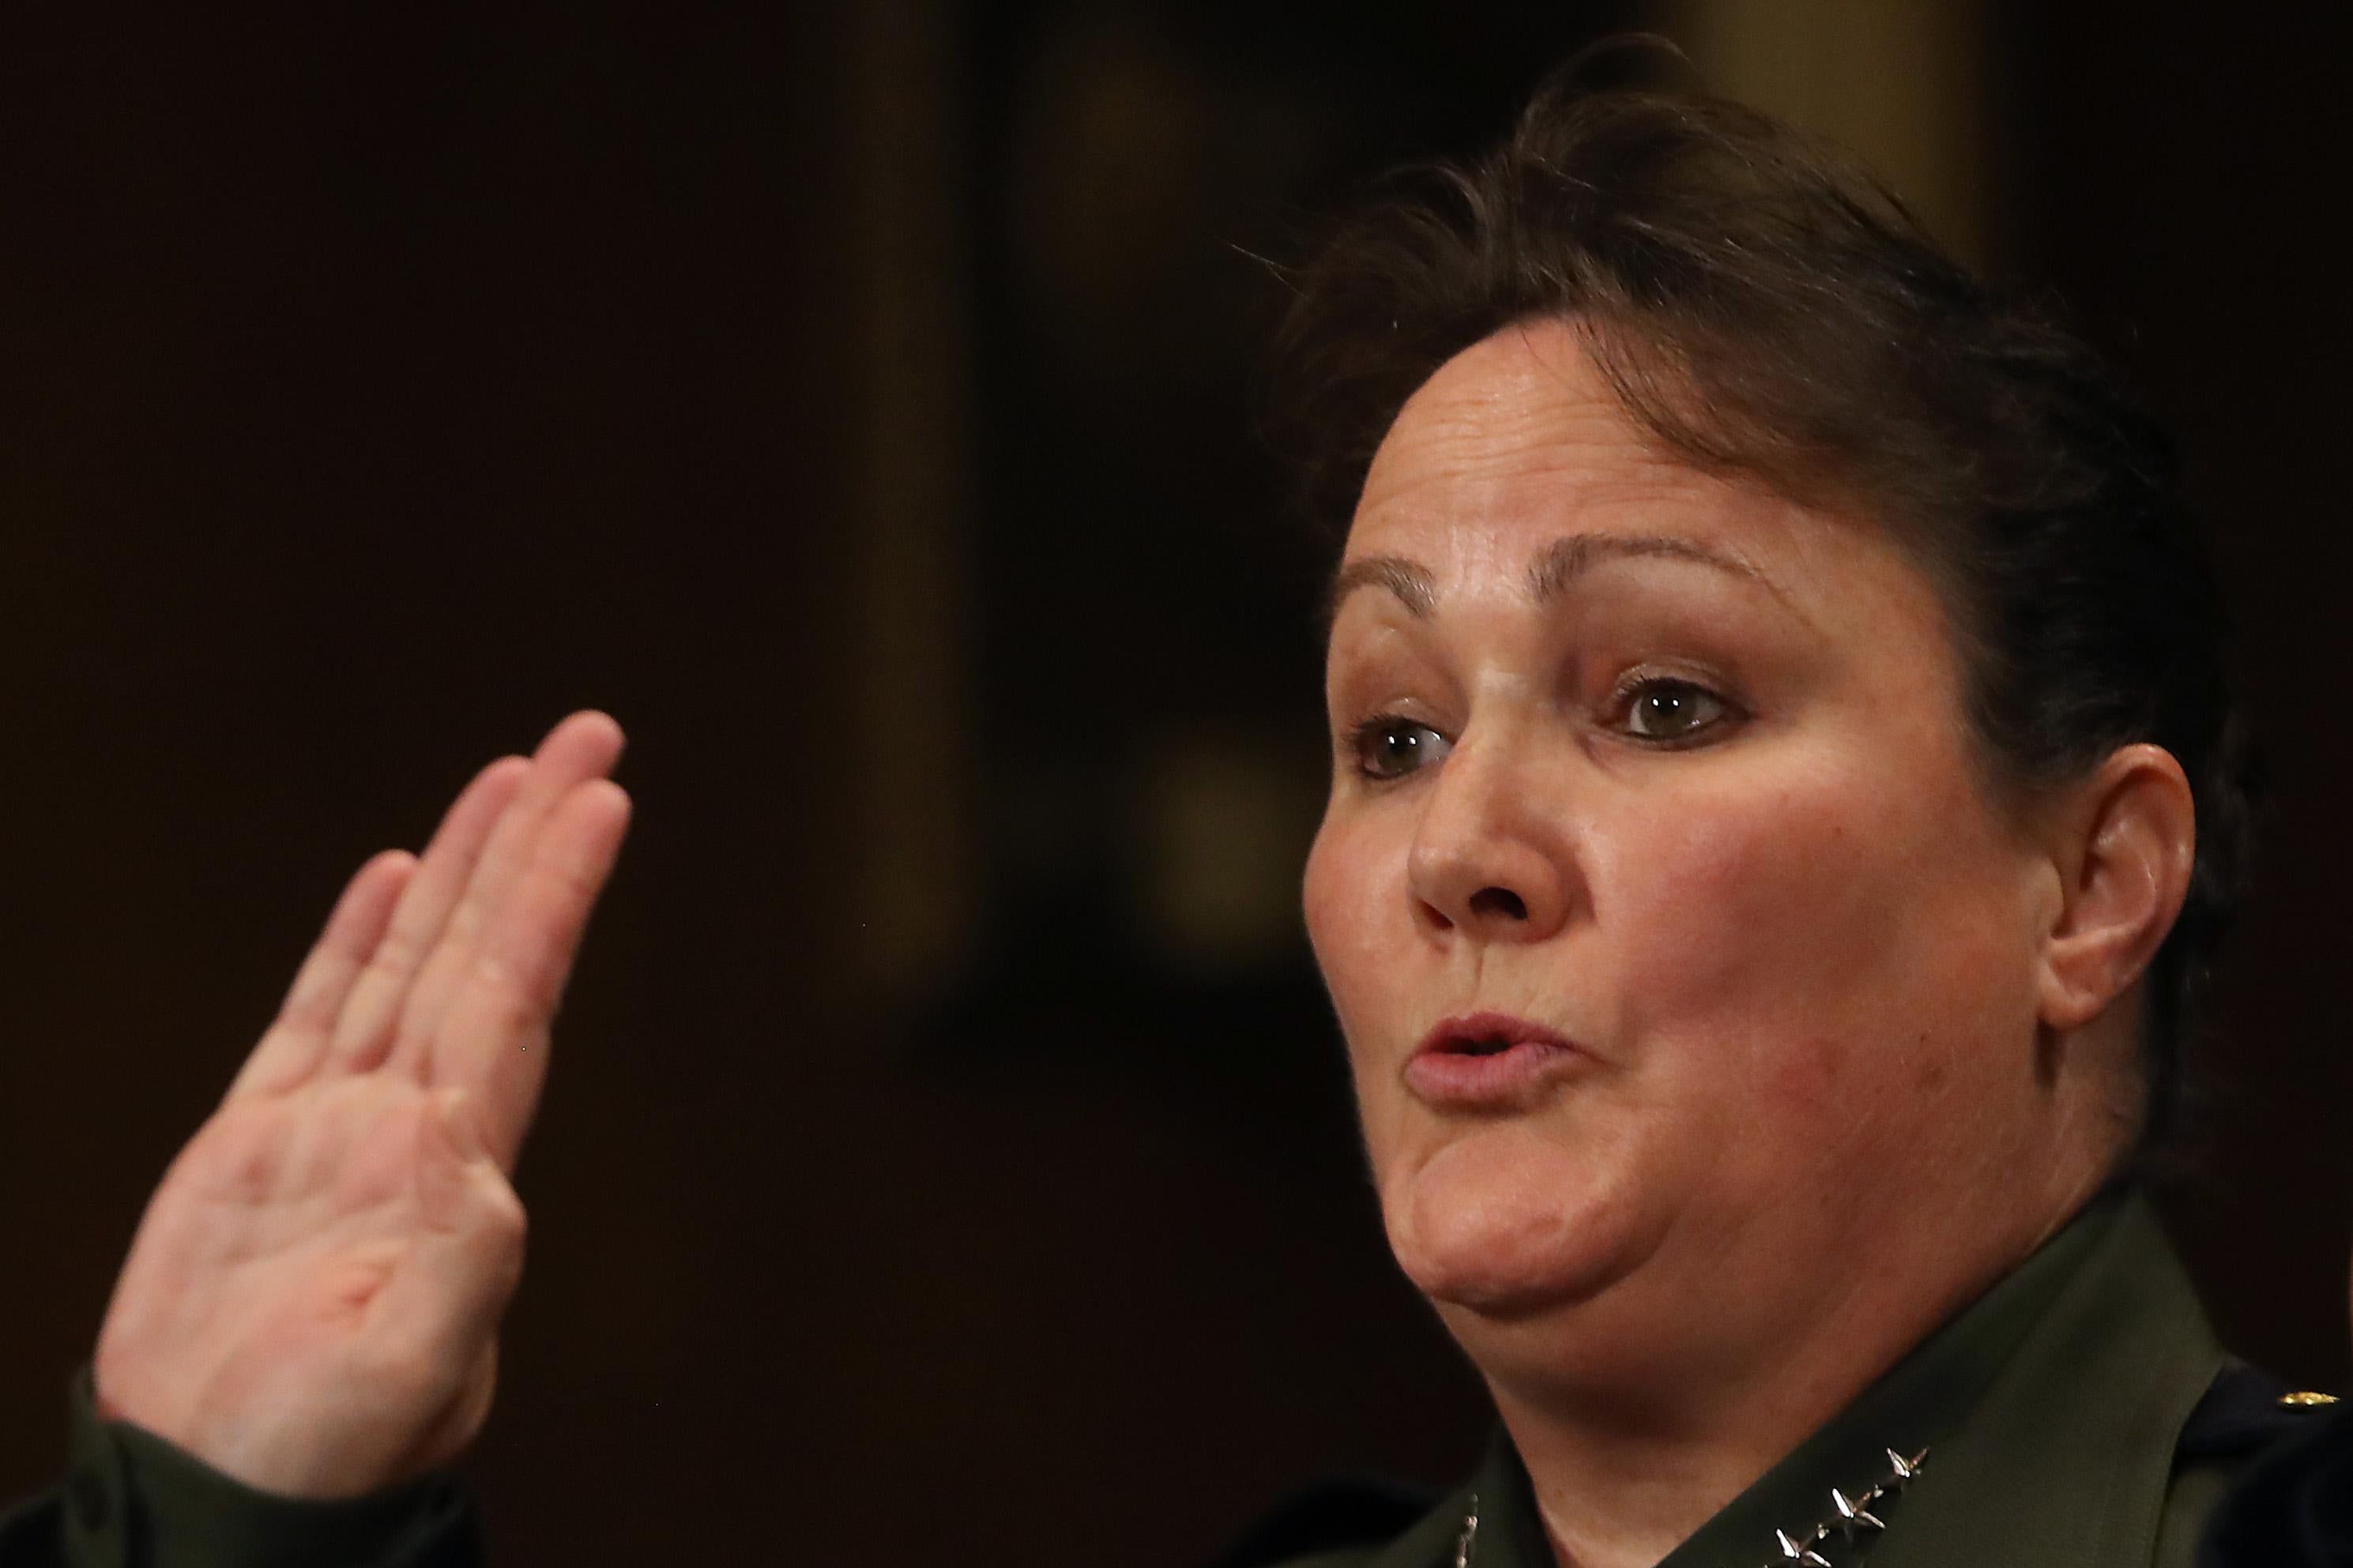 Carla Provost raises her hand to be sworn in.